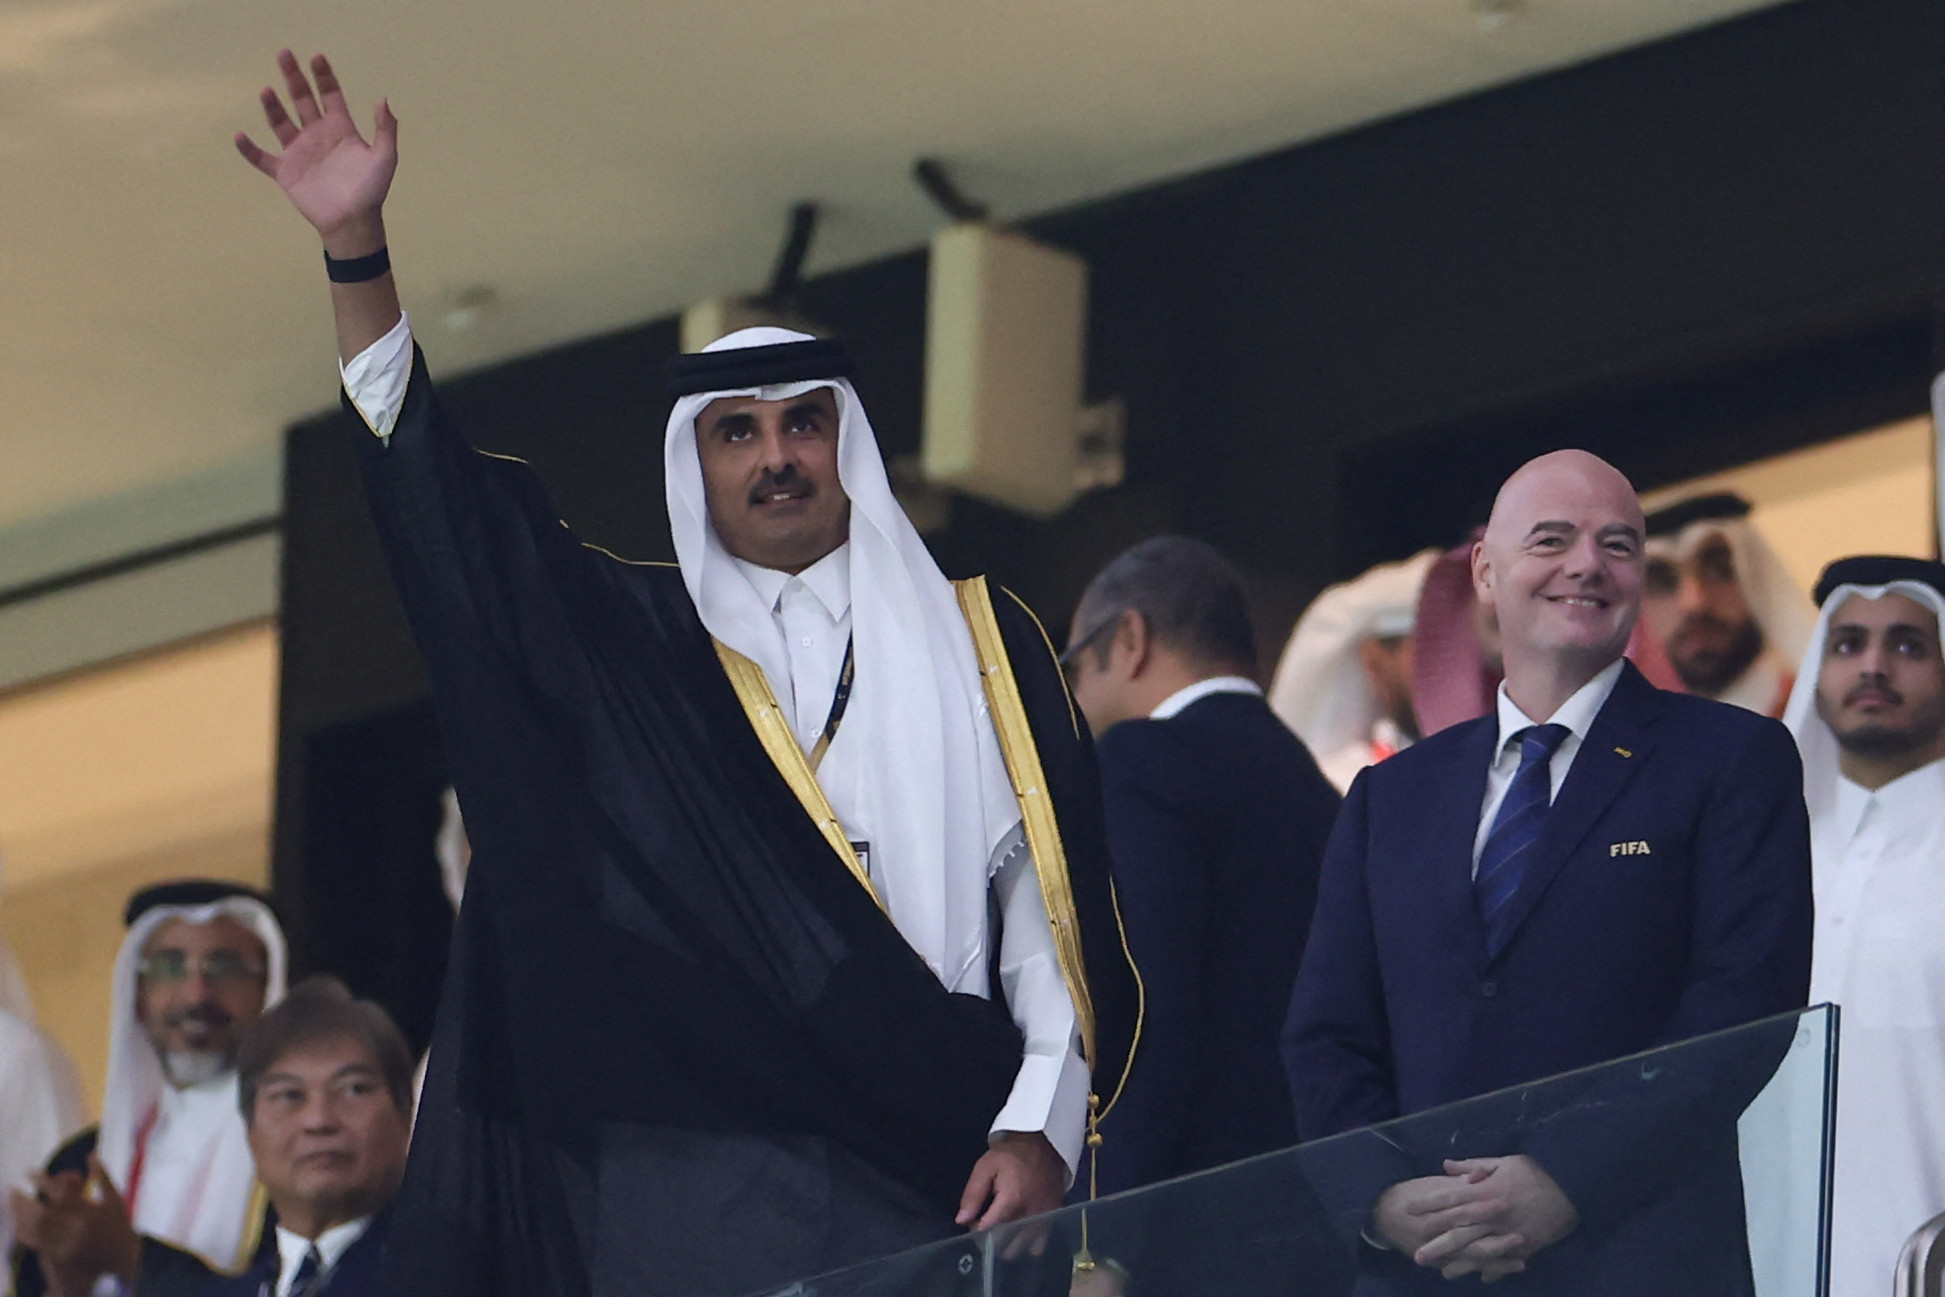 Qatari Emir Sheikh Tamim bin Hamad Al Thani hailed the diversity on show at the FIFA World Cup - despite his country facing criticism over outlawing same-sex relationships ©Getty Images